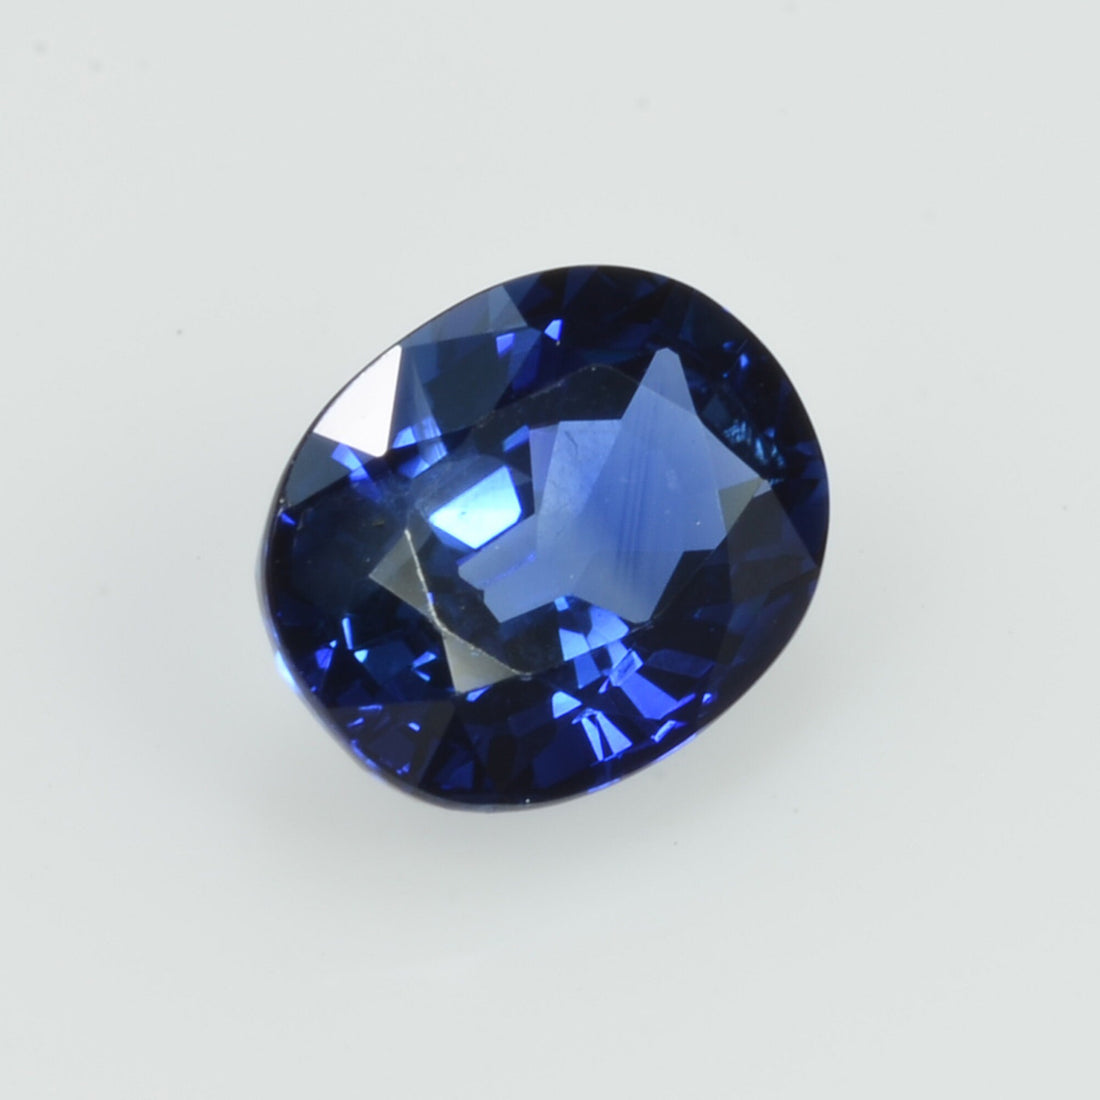 1.33 cts Natural Blue Sapphire Loose Gemstone Oval Cut